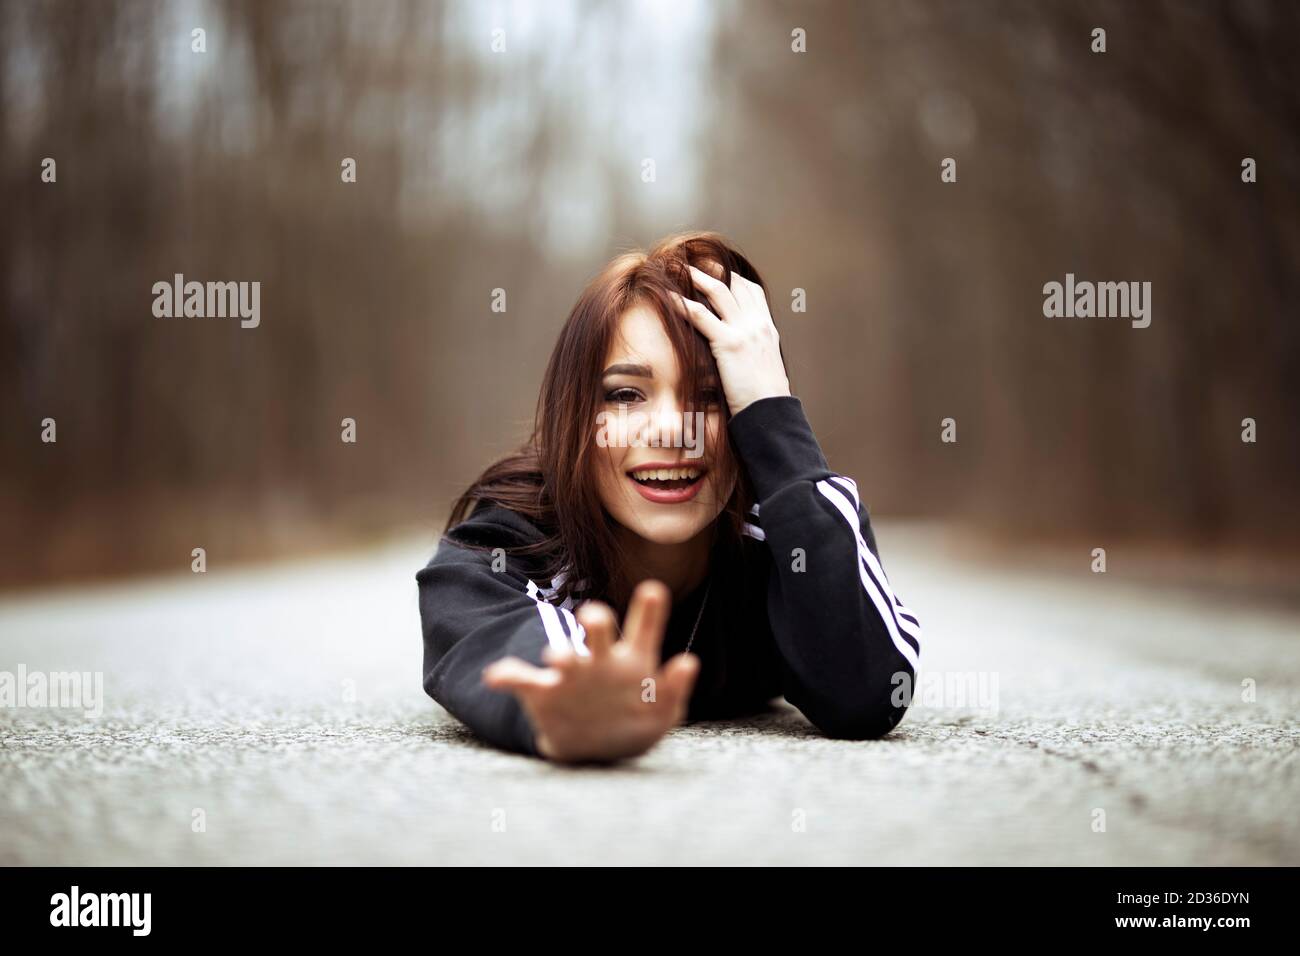 A solitary young poses on the ground in the middle of a road, reaching out with a smile Stock Photo